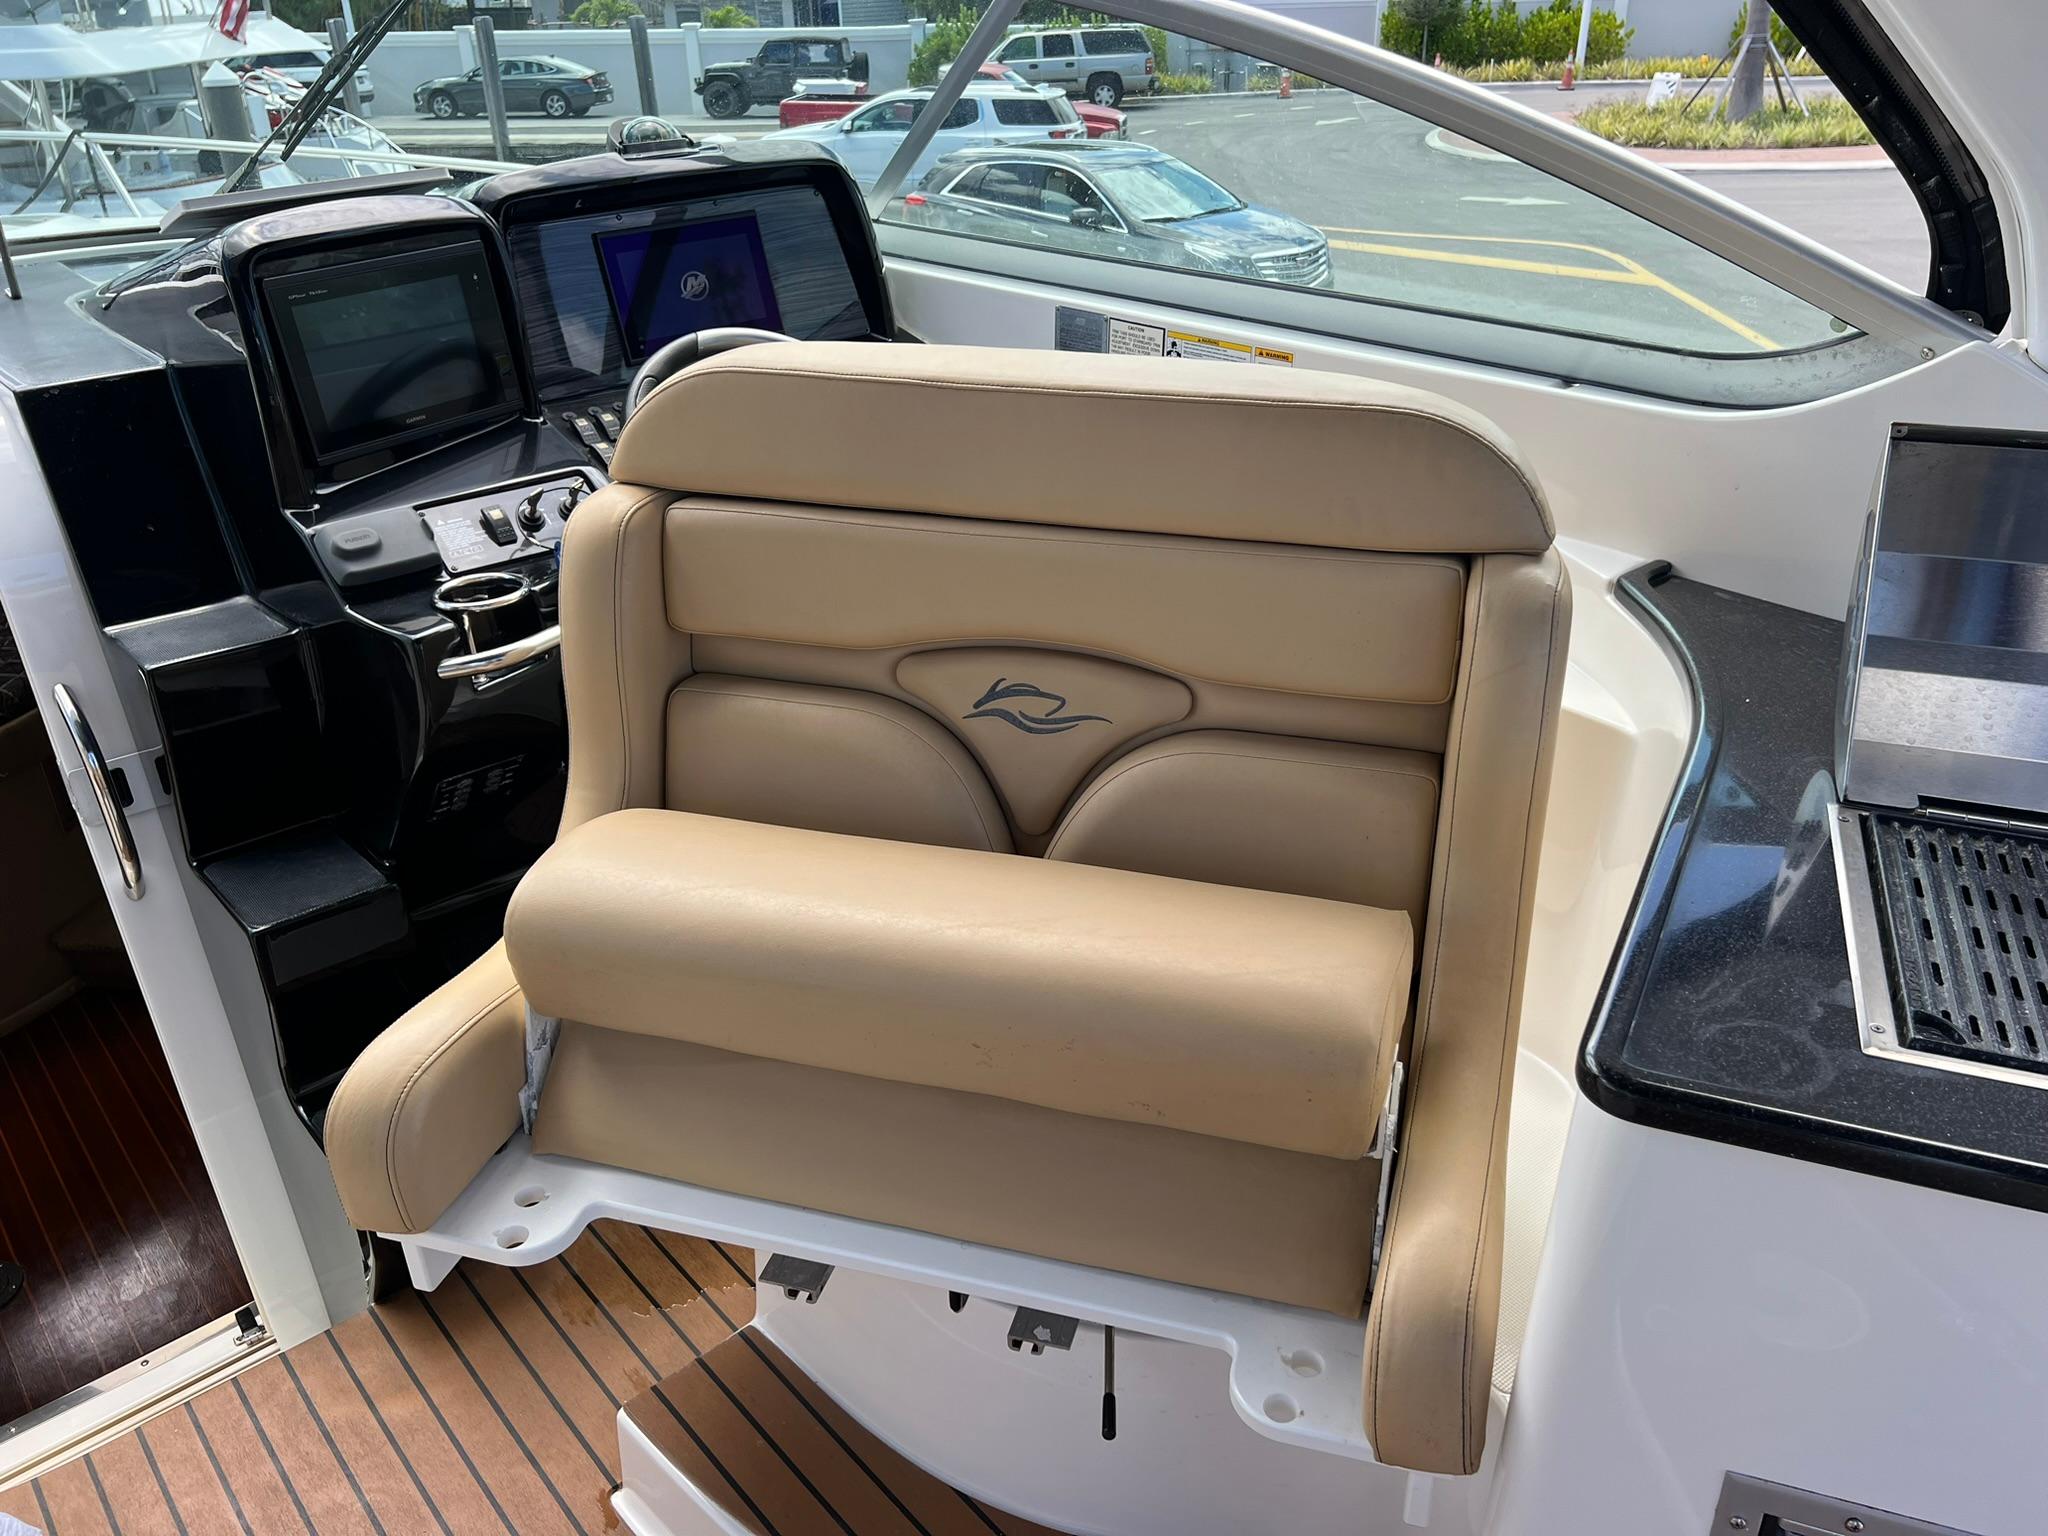 2010 Rinker - Captains chair